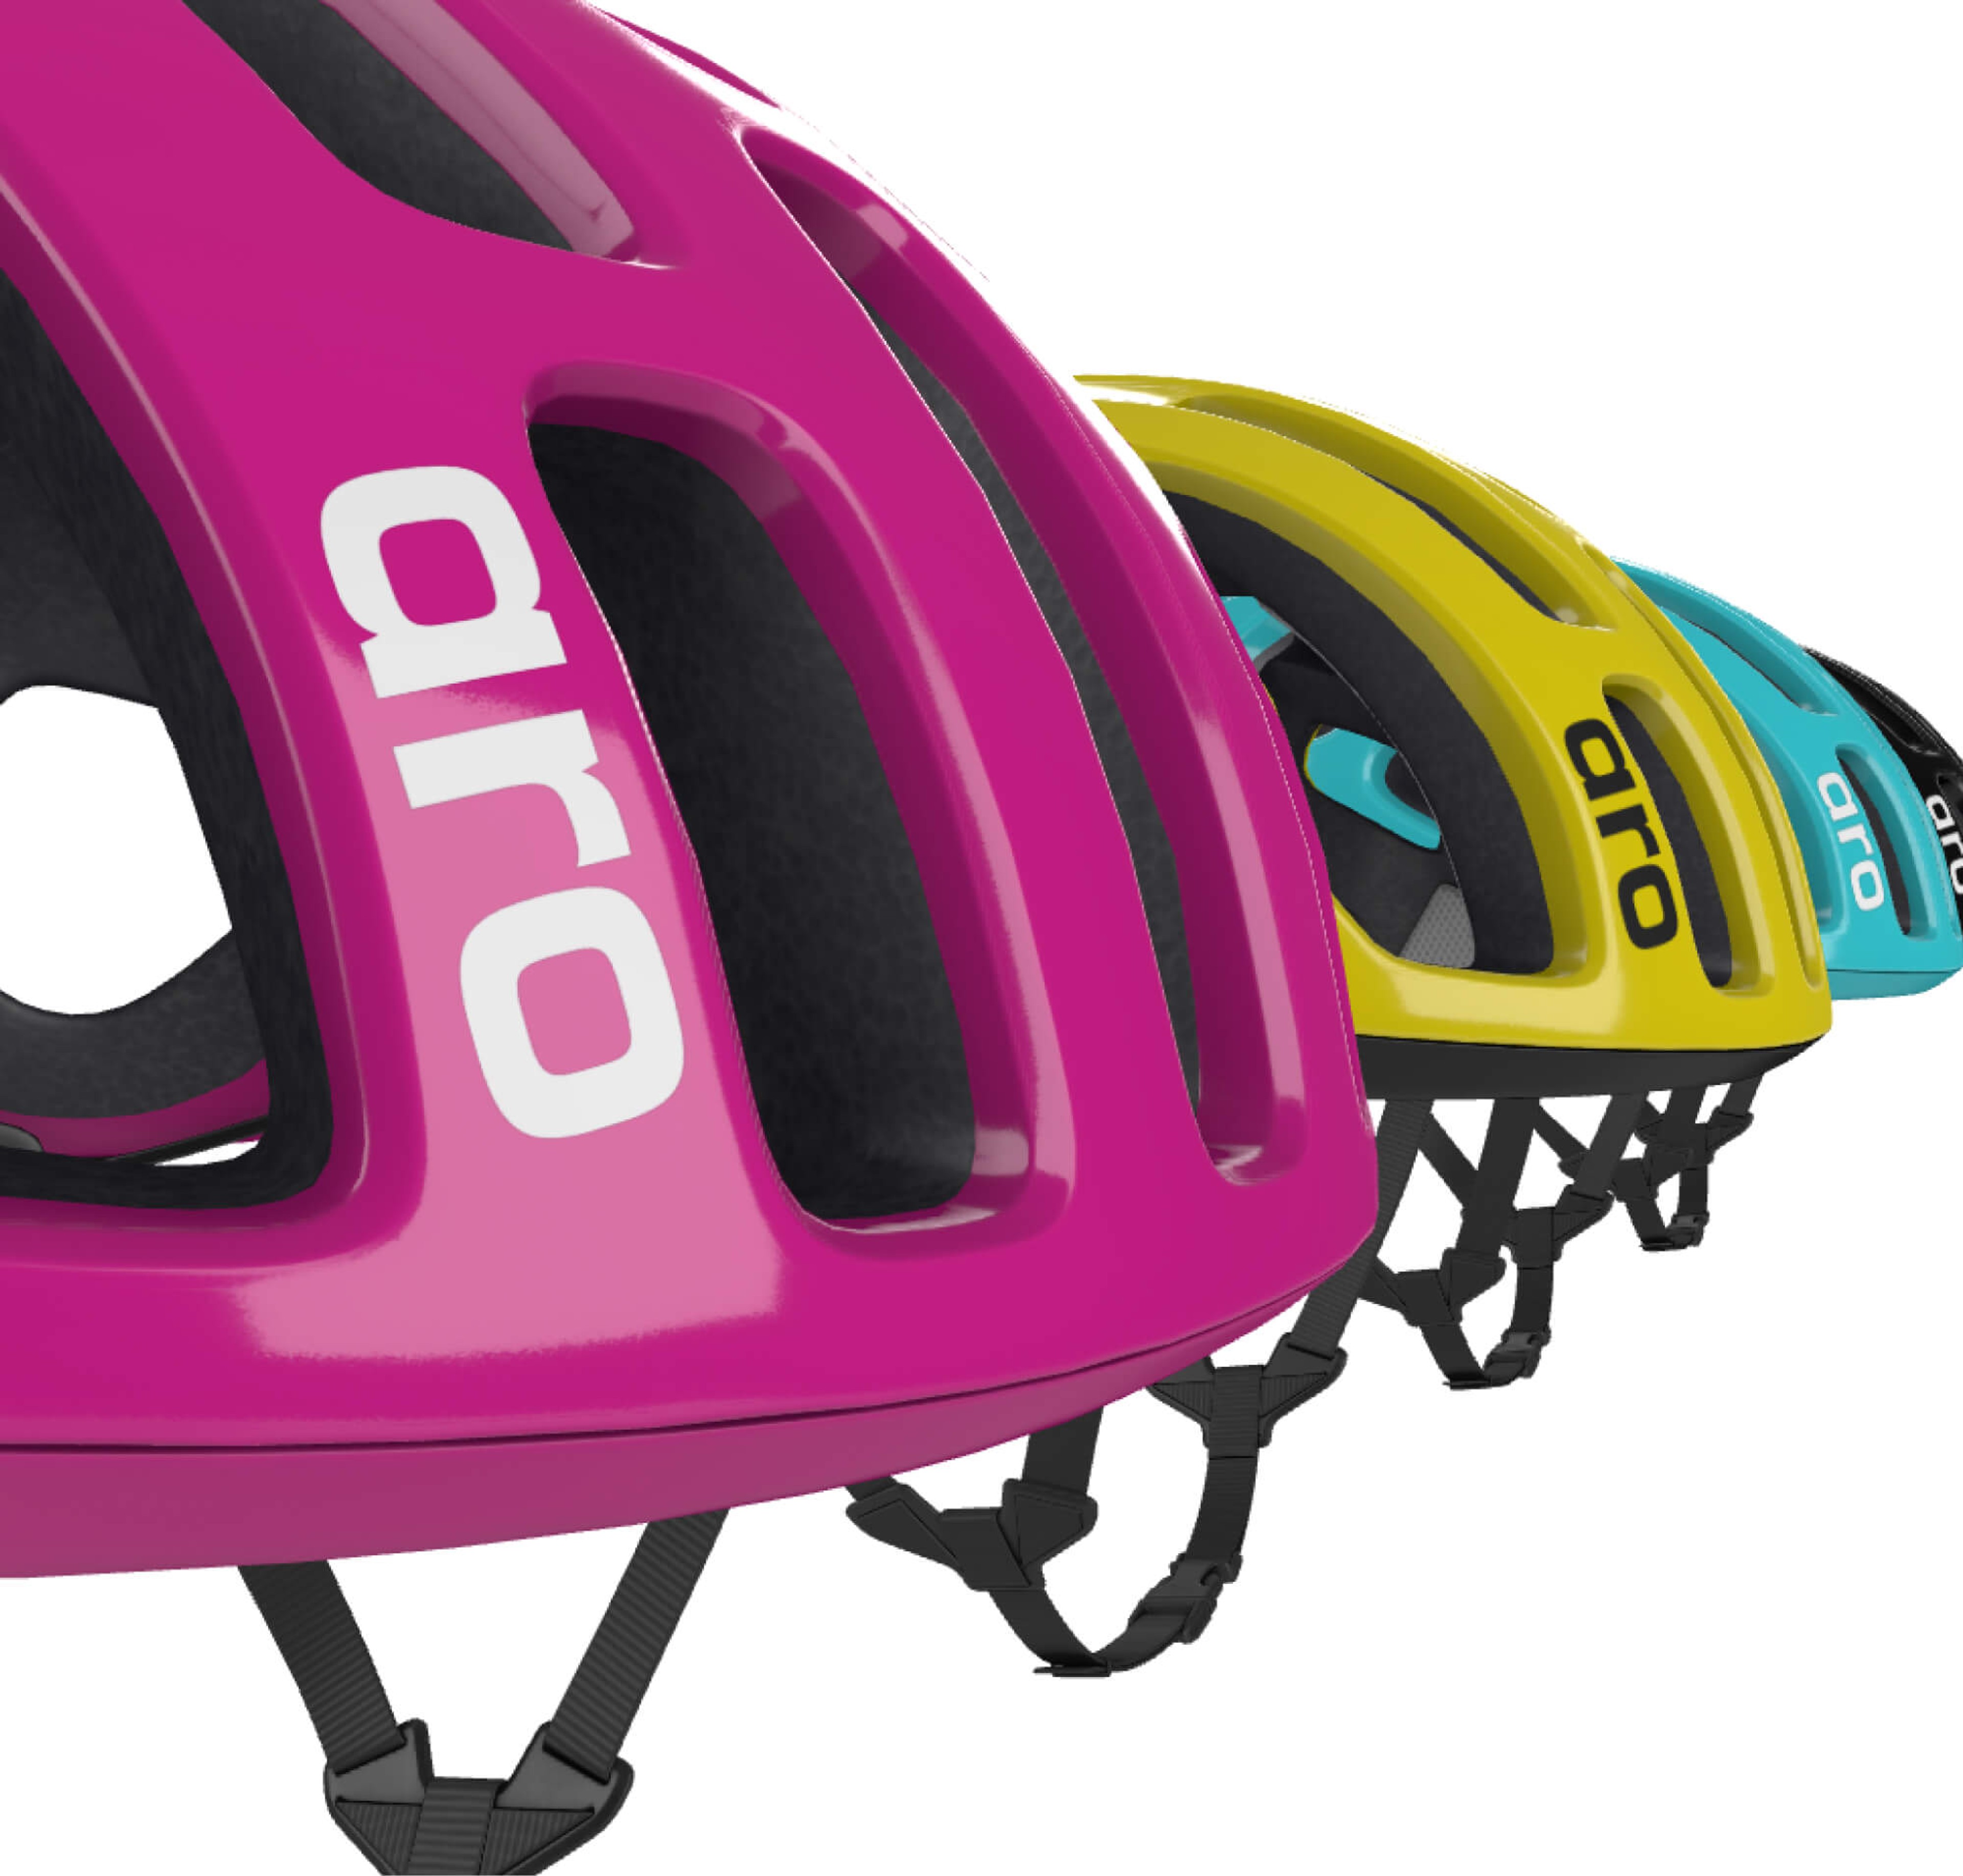 Four helmets in a row on a white background